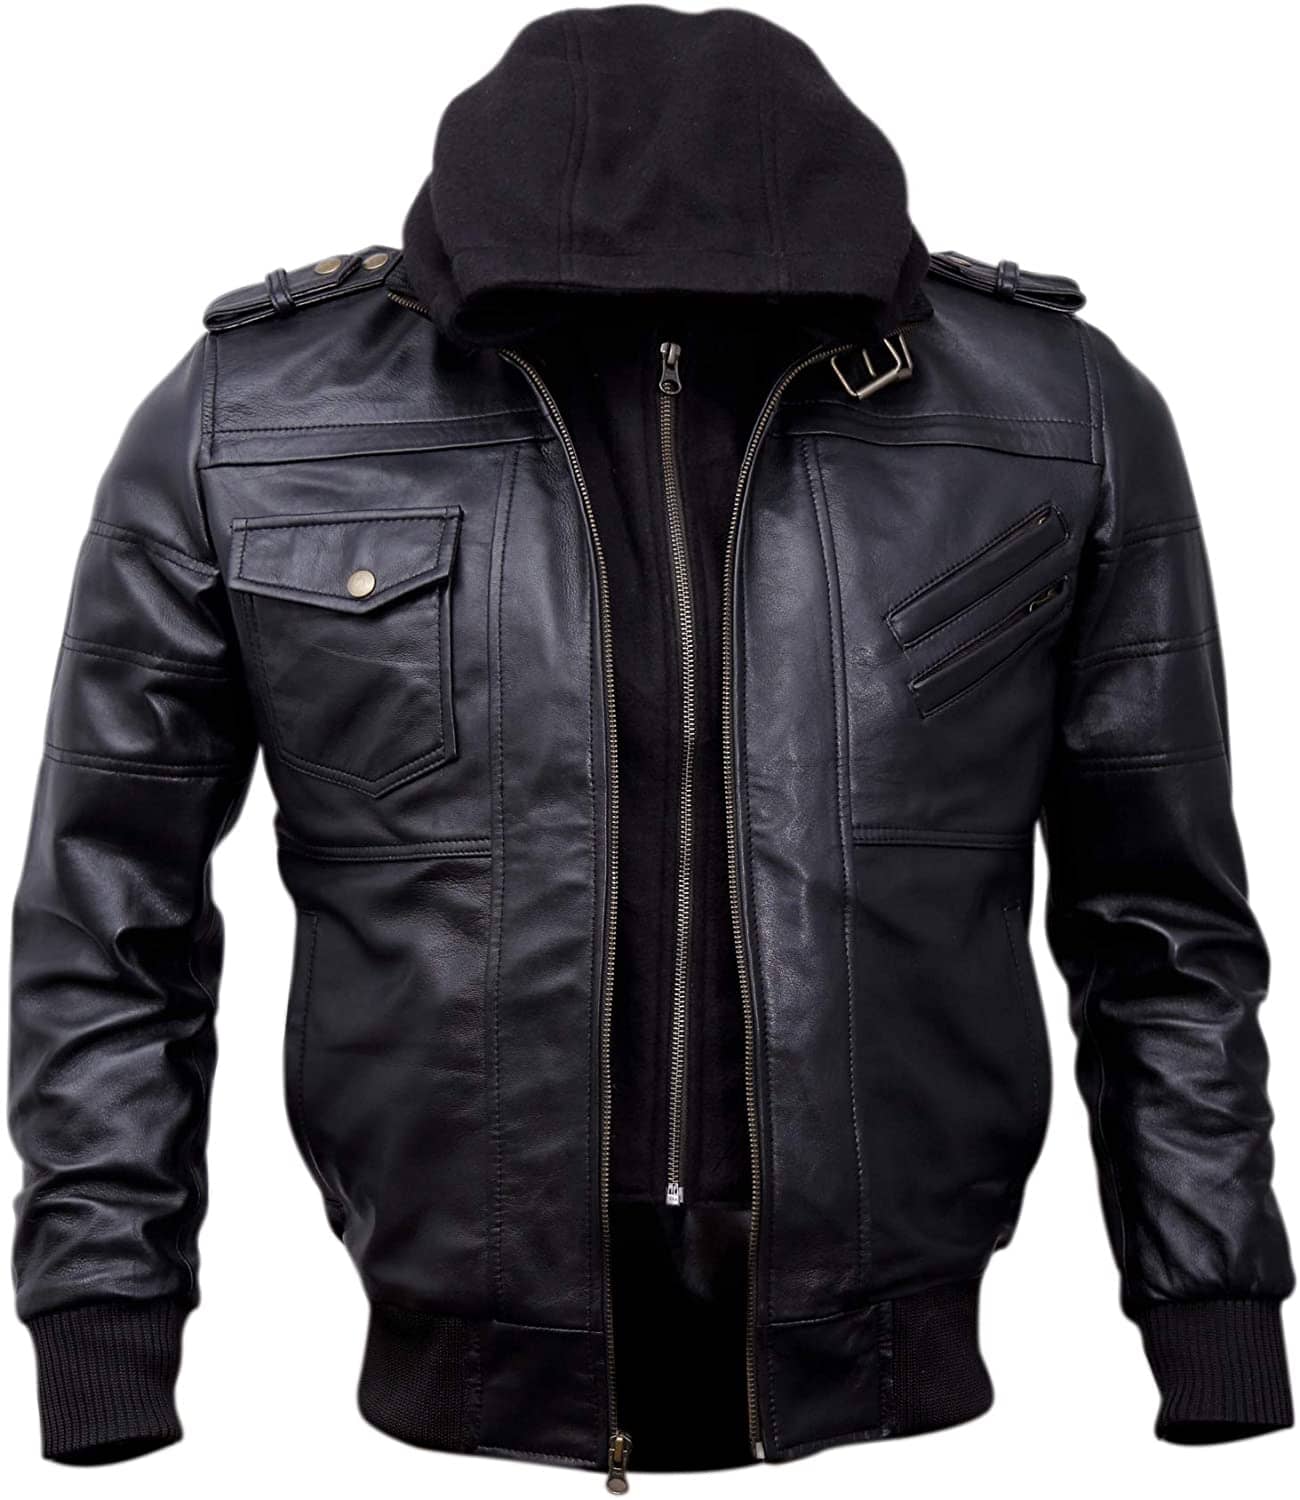 Men's Bomber Leather Jackets with Removable Hood